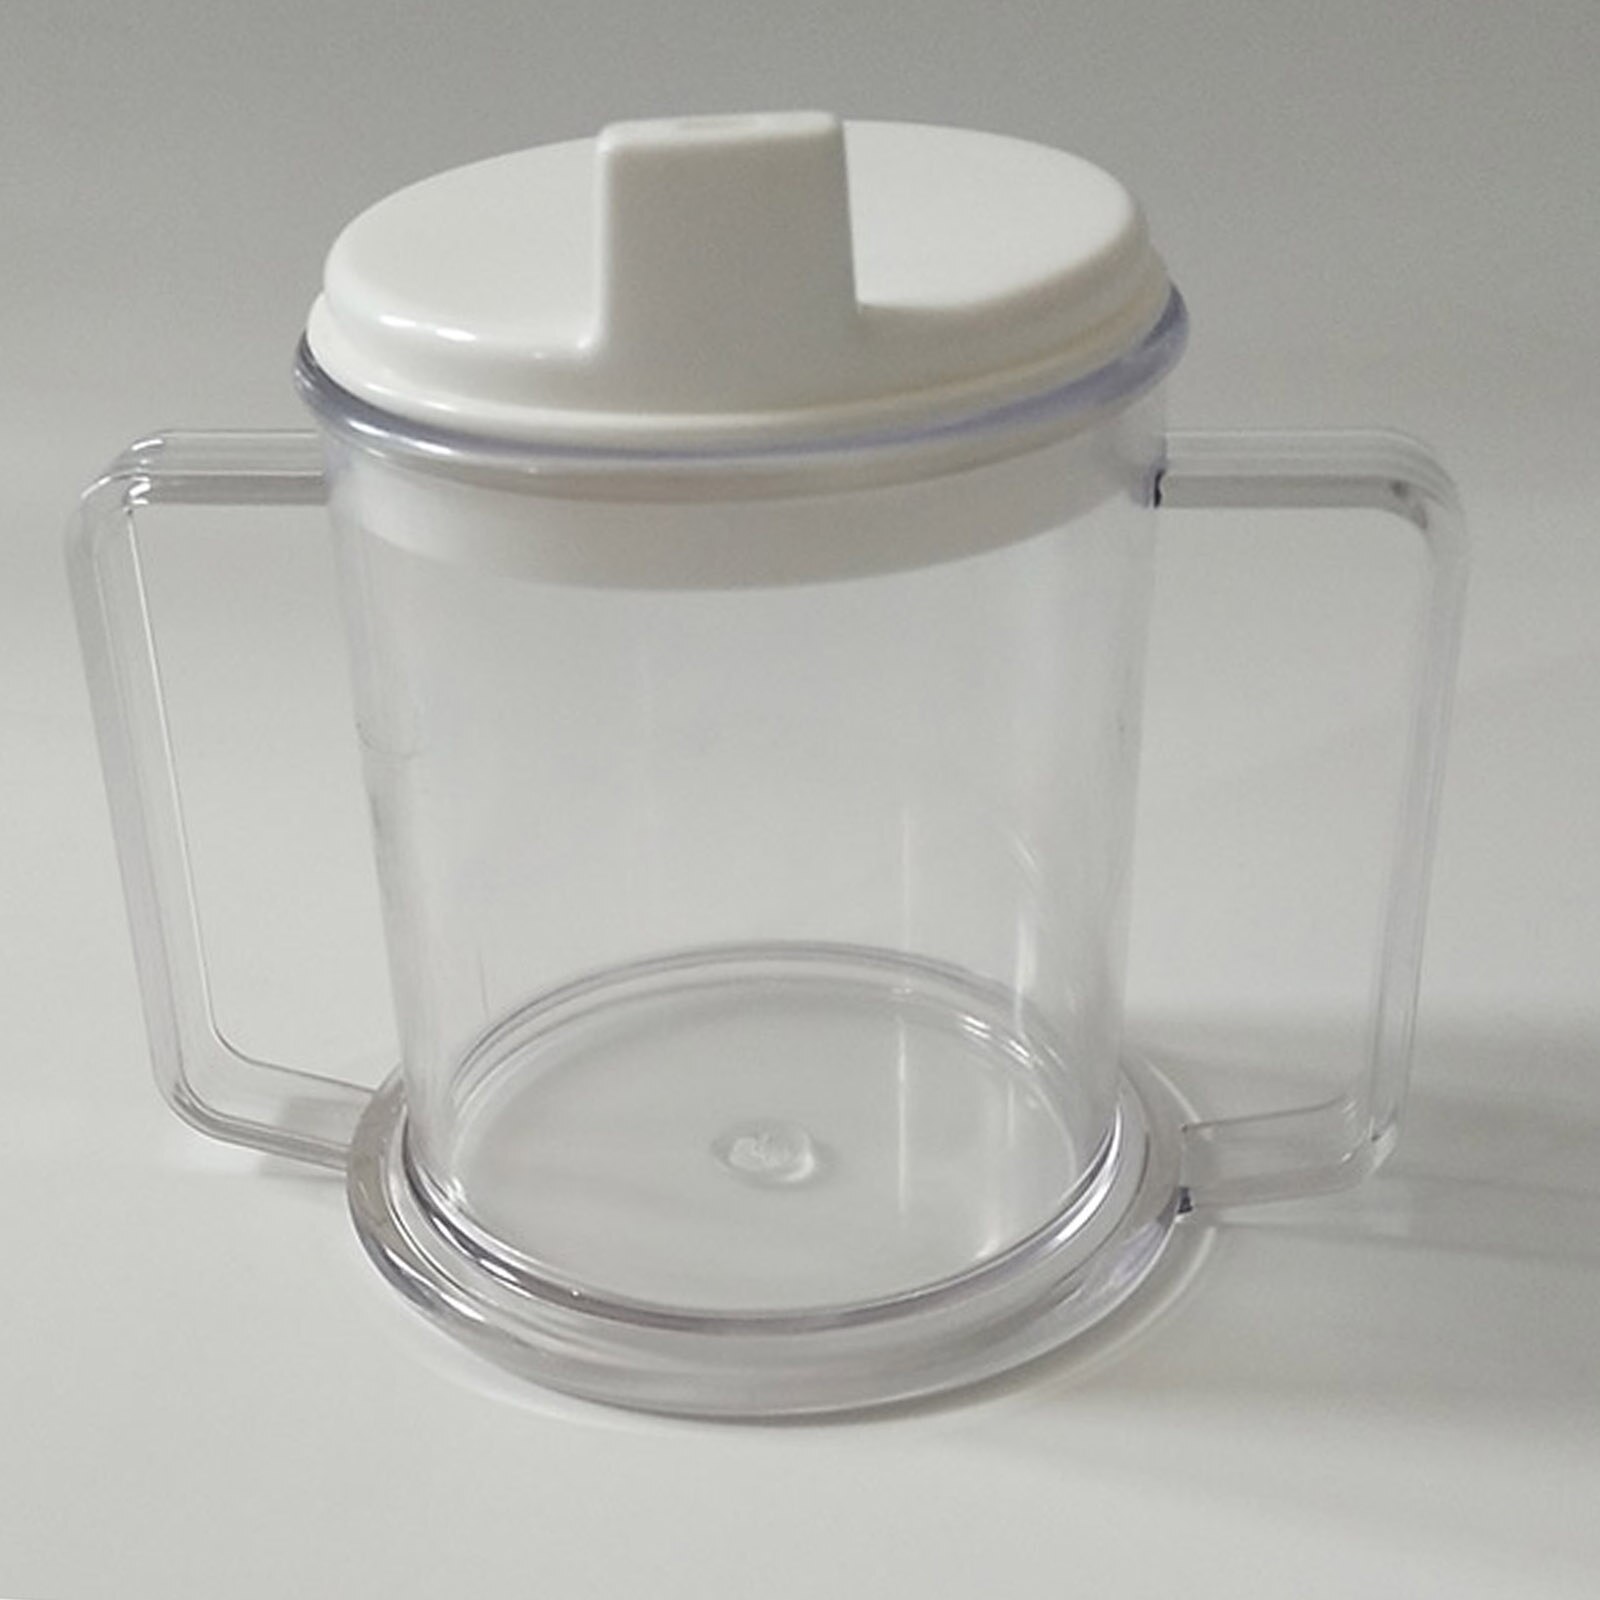 Clear Plastic Mug 2 Handled Sippy Cup 10oz. Drinking Cup for Kids Adult Elderly